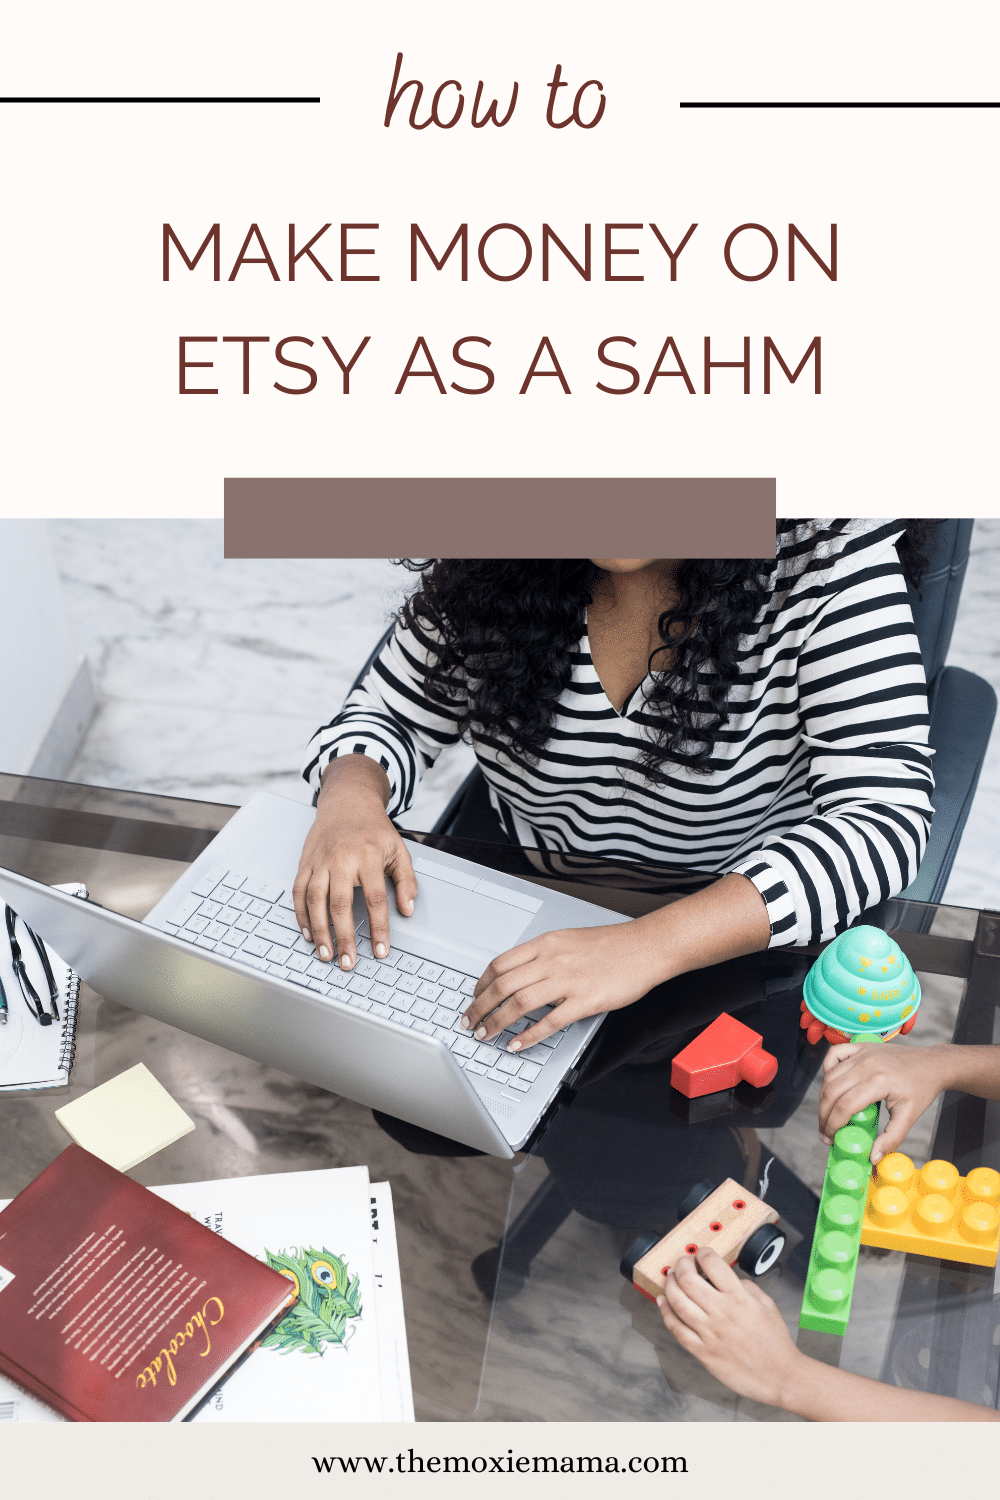 Etsy is an online marketplace for handmade, vintage, and unique goods. It is a platform that allows individuals and stay-at-home moms to sell their products to a global audience. 